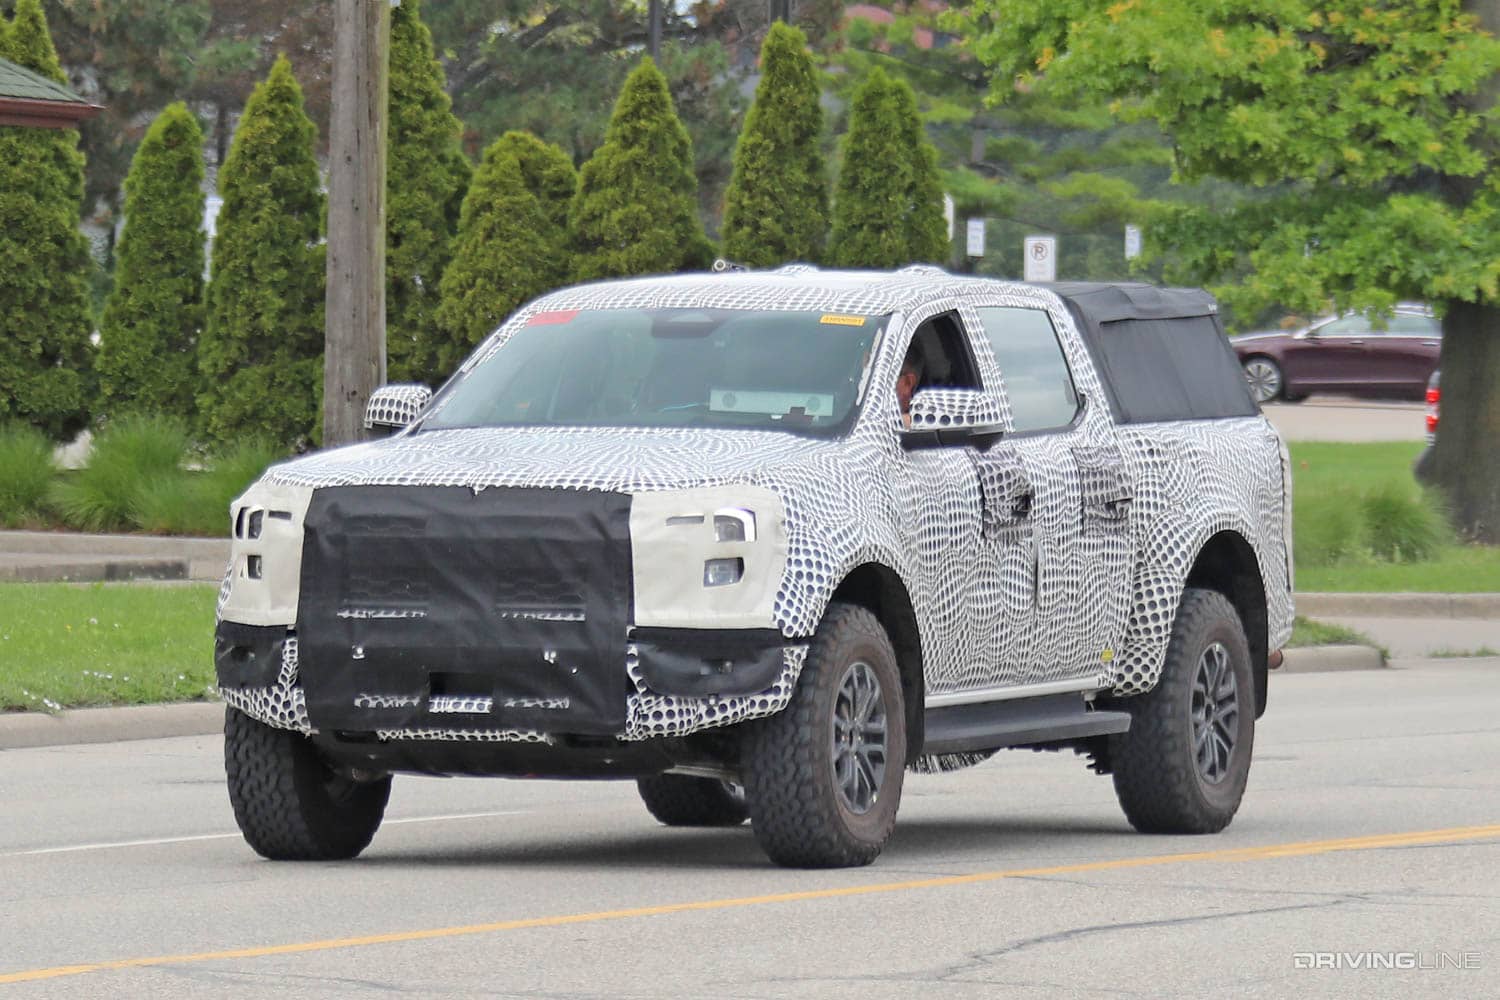 2023 Ford Ranger Raptor Spy Photos: Is this Confirmation of an American